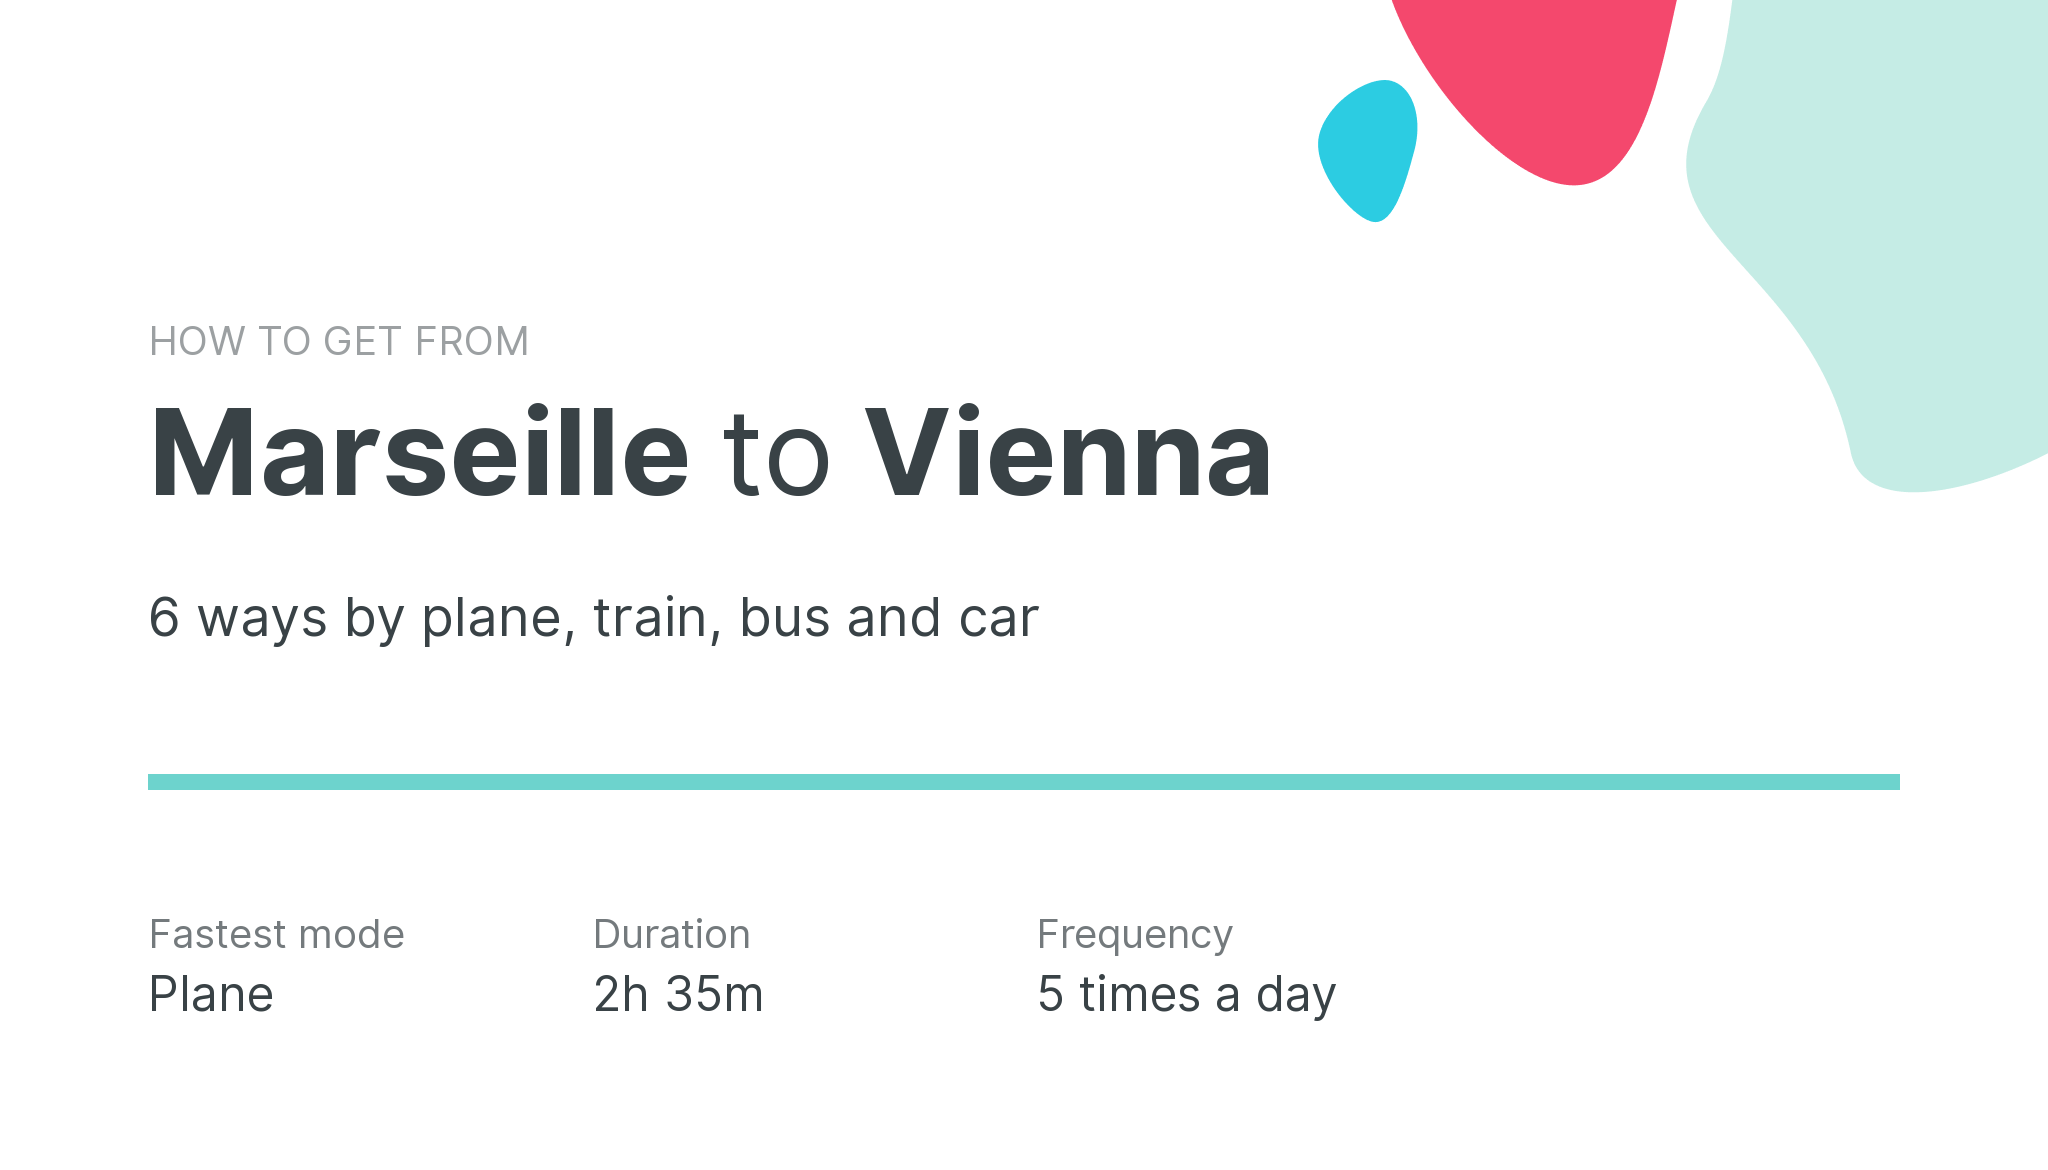 How do I get from Marseille to Vienna